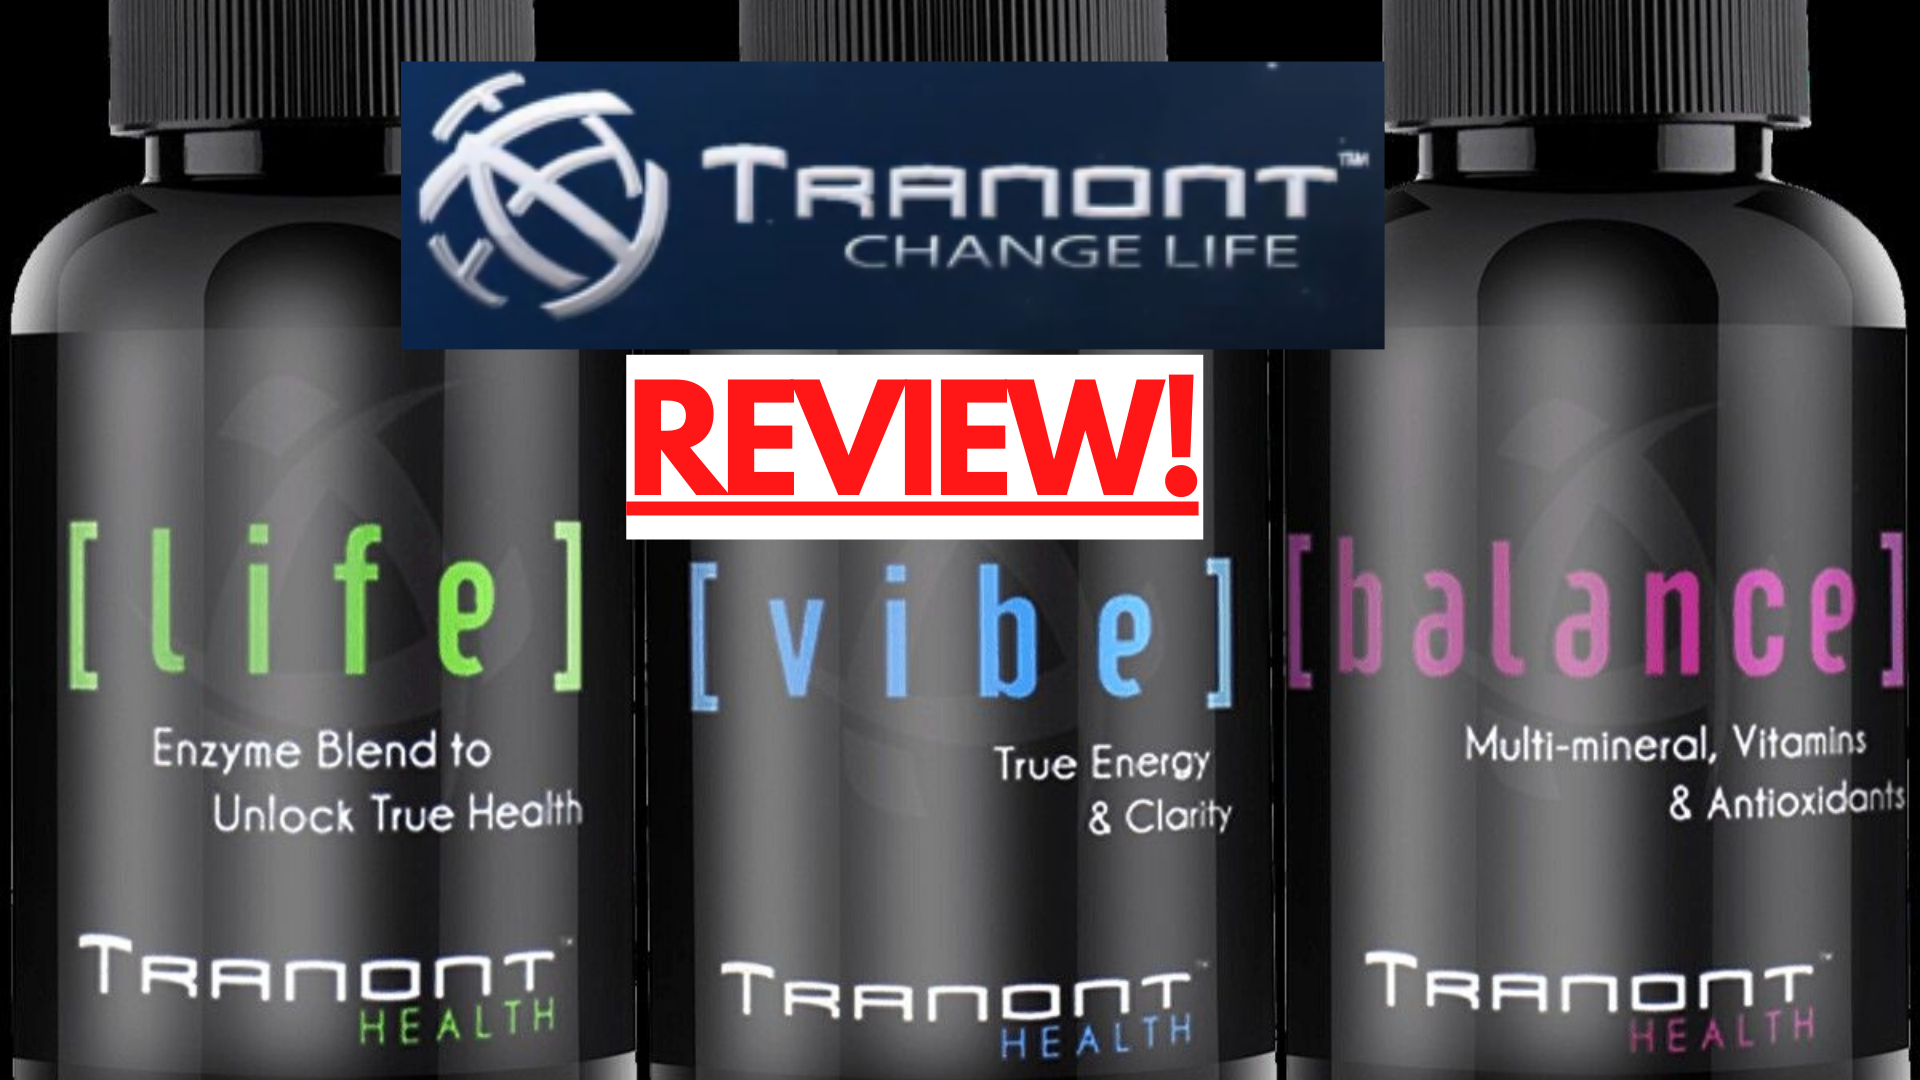 Is Tranont a scam? 2021 Tranont Review